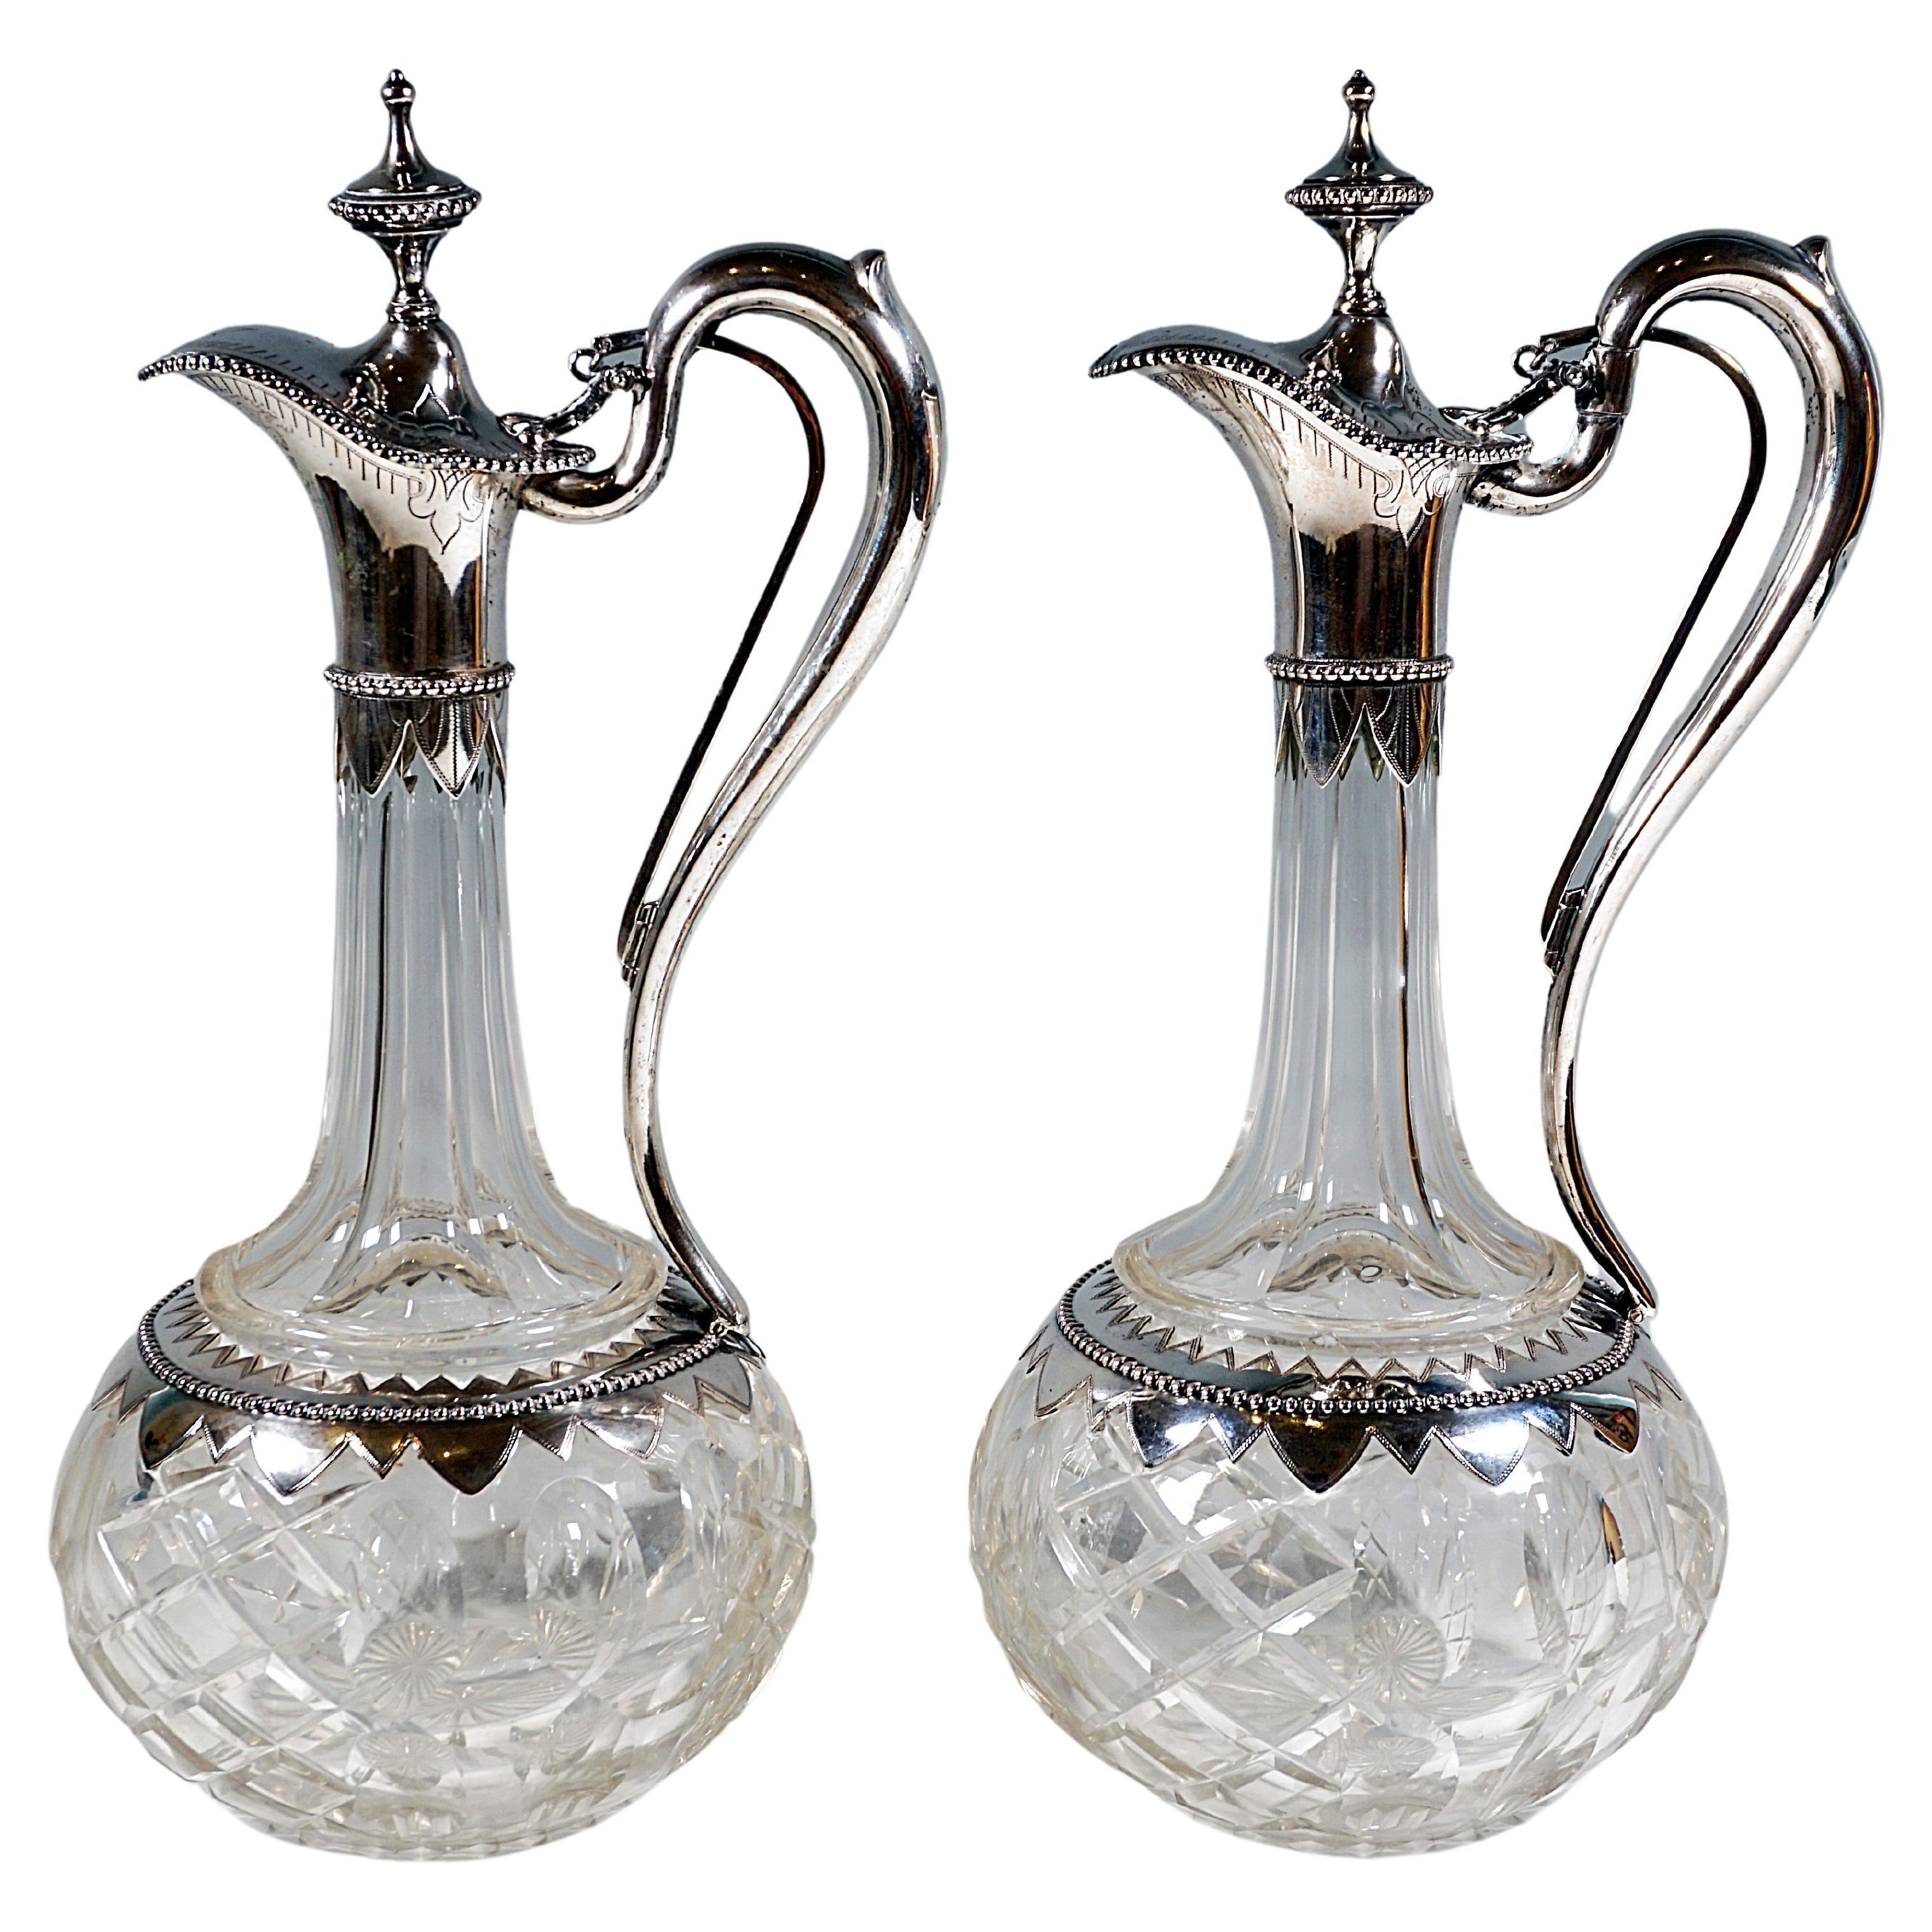 Pair of Historicism Glass Carafes with Silver Mounts and Pull Mechanism, Germany